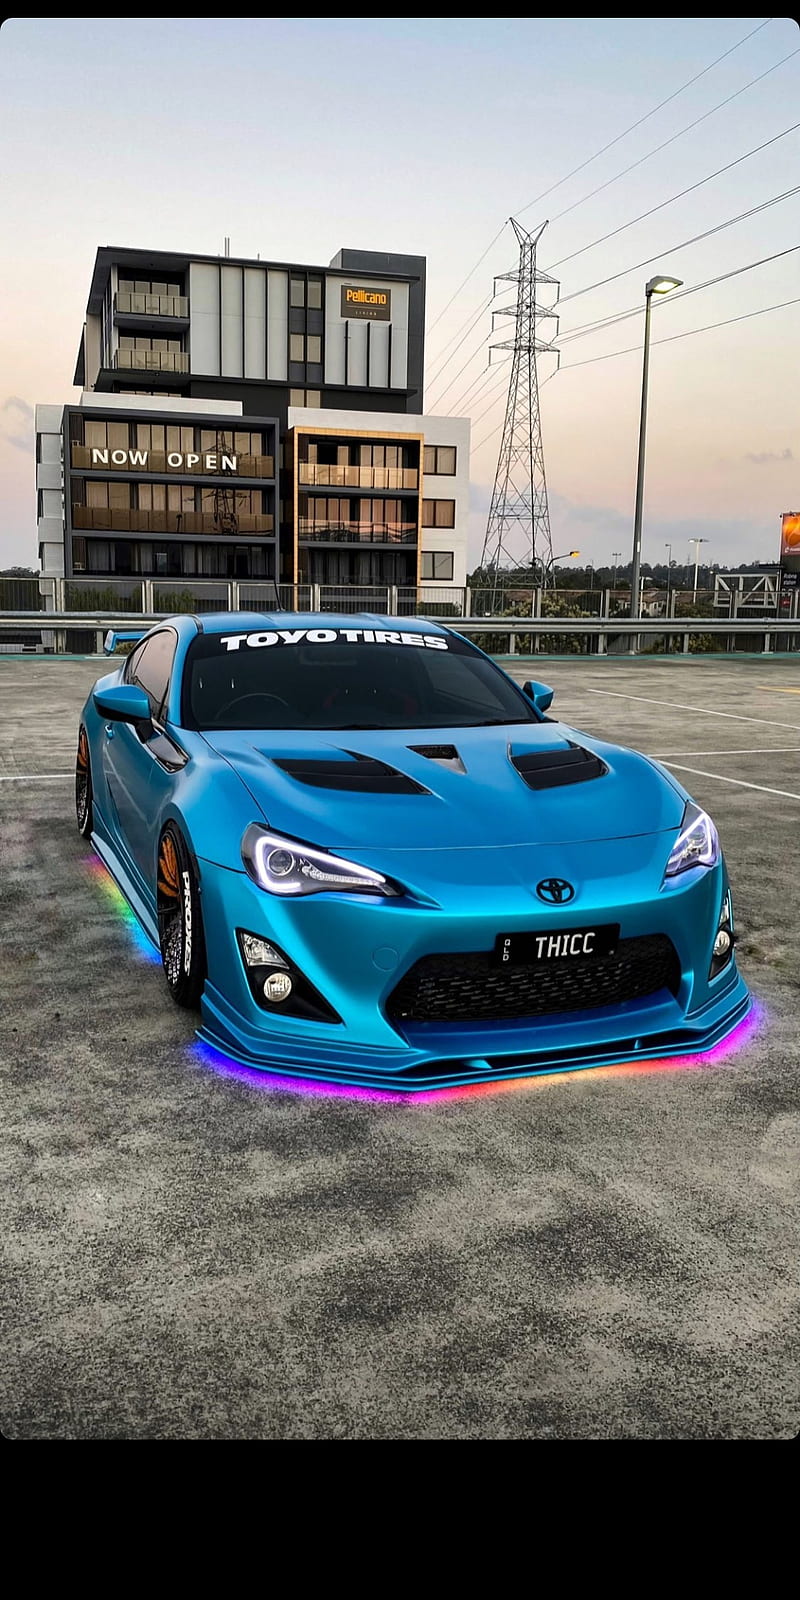 Thicc86 86 Blue Gt86 Led Rgb Thicc Toyota Turbo Hd Mobile Wallpaper Peakpx